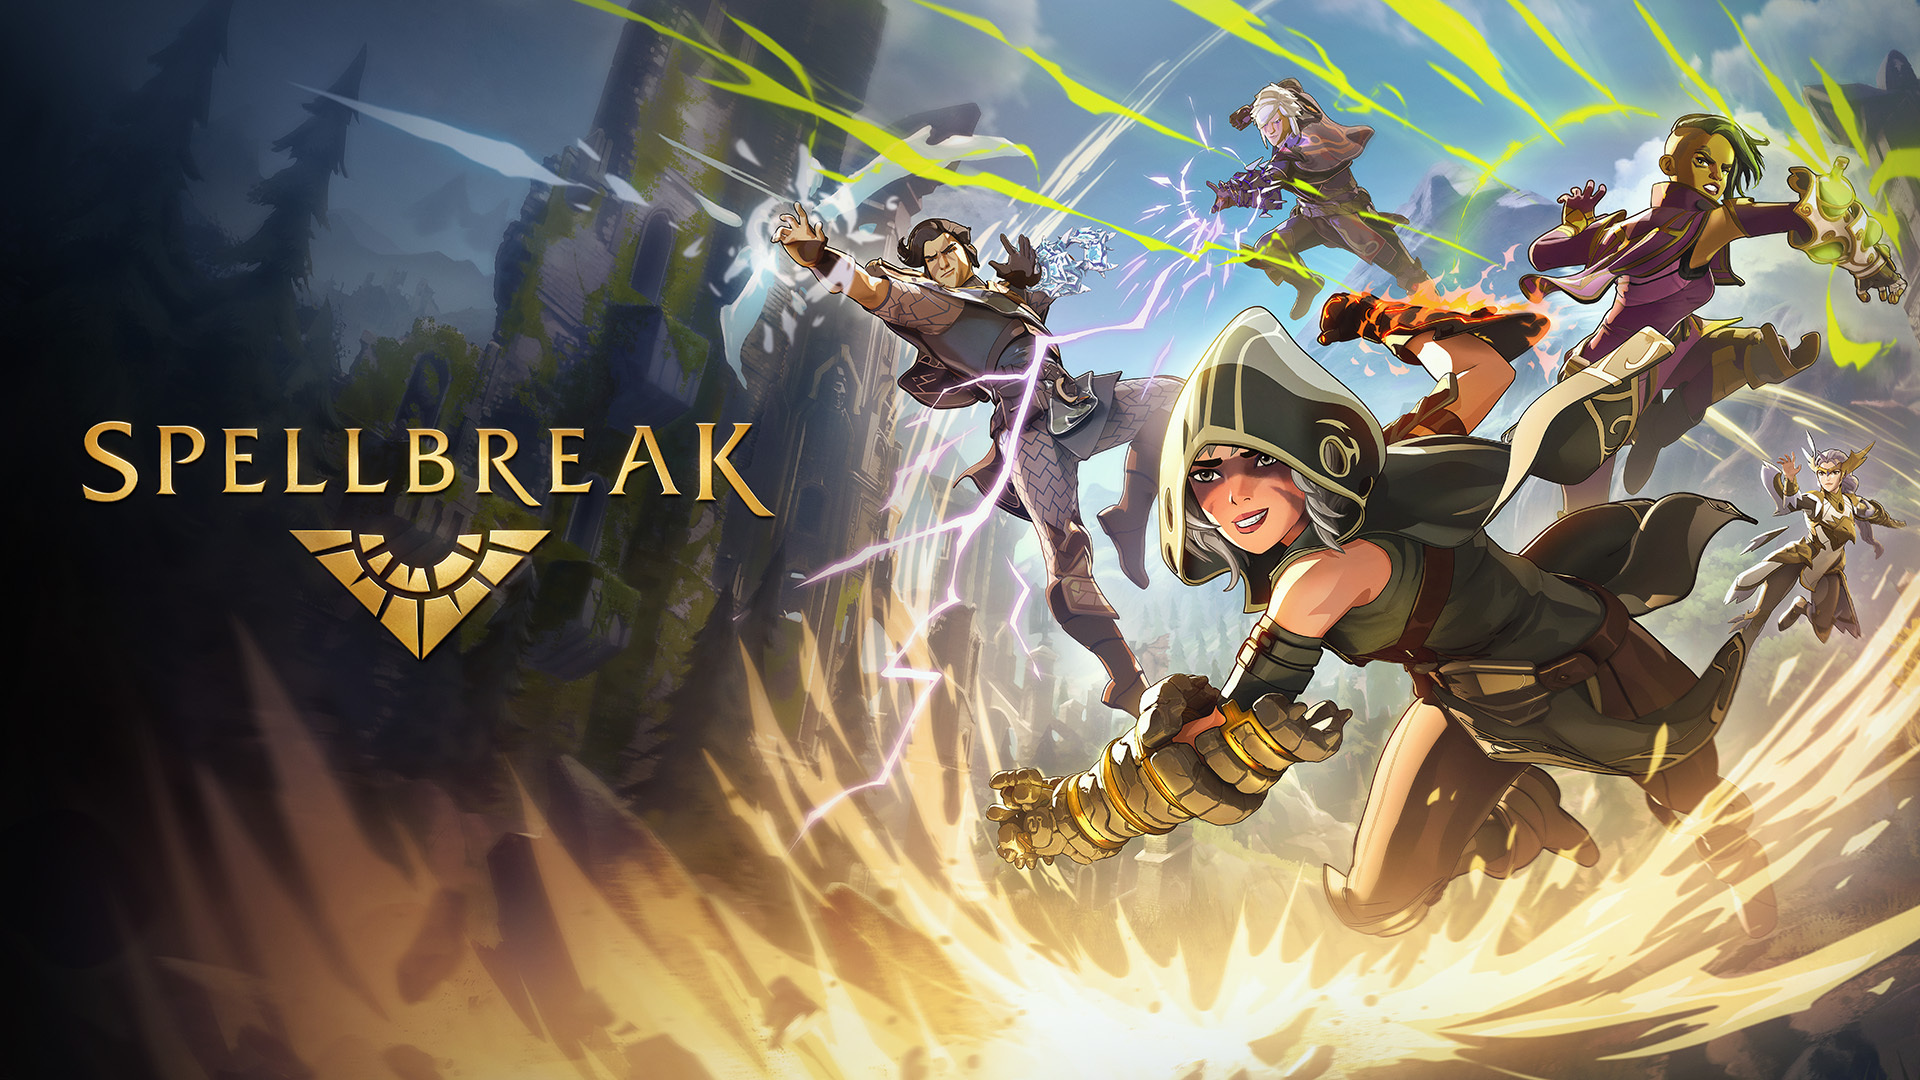 Spellbreak Launching “Prologue: The Gathering Storm” on October 22nd